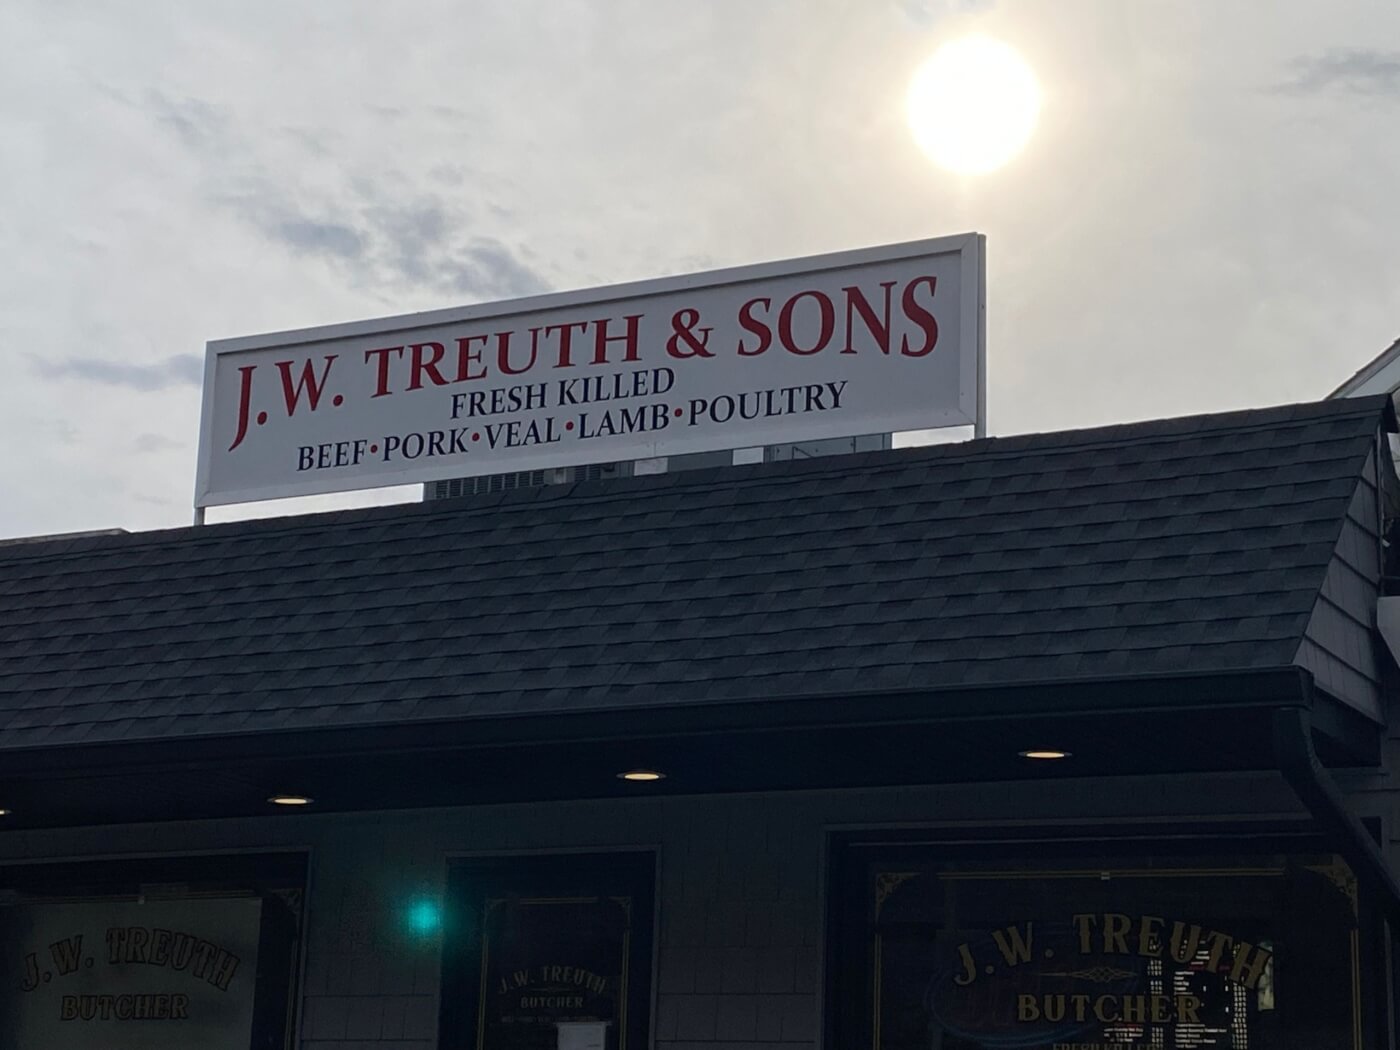 sign for J.W. Treuth & Sons slaughterhouse in Maryland